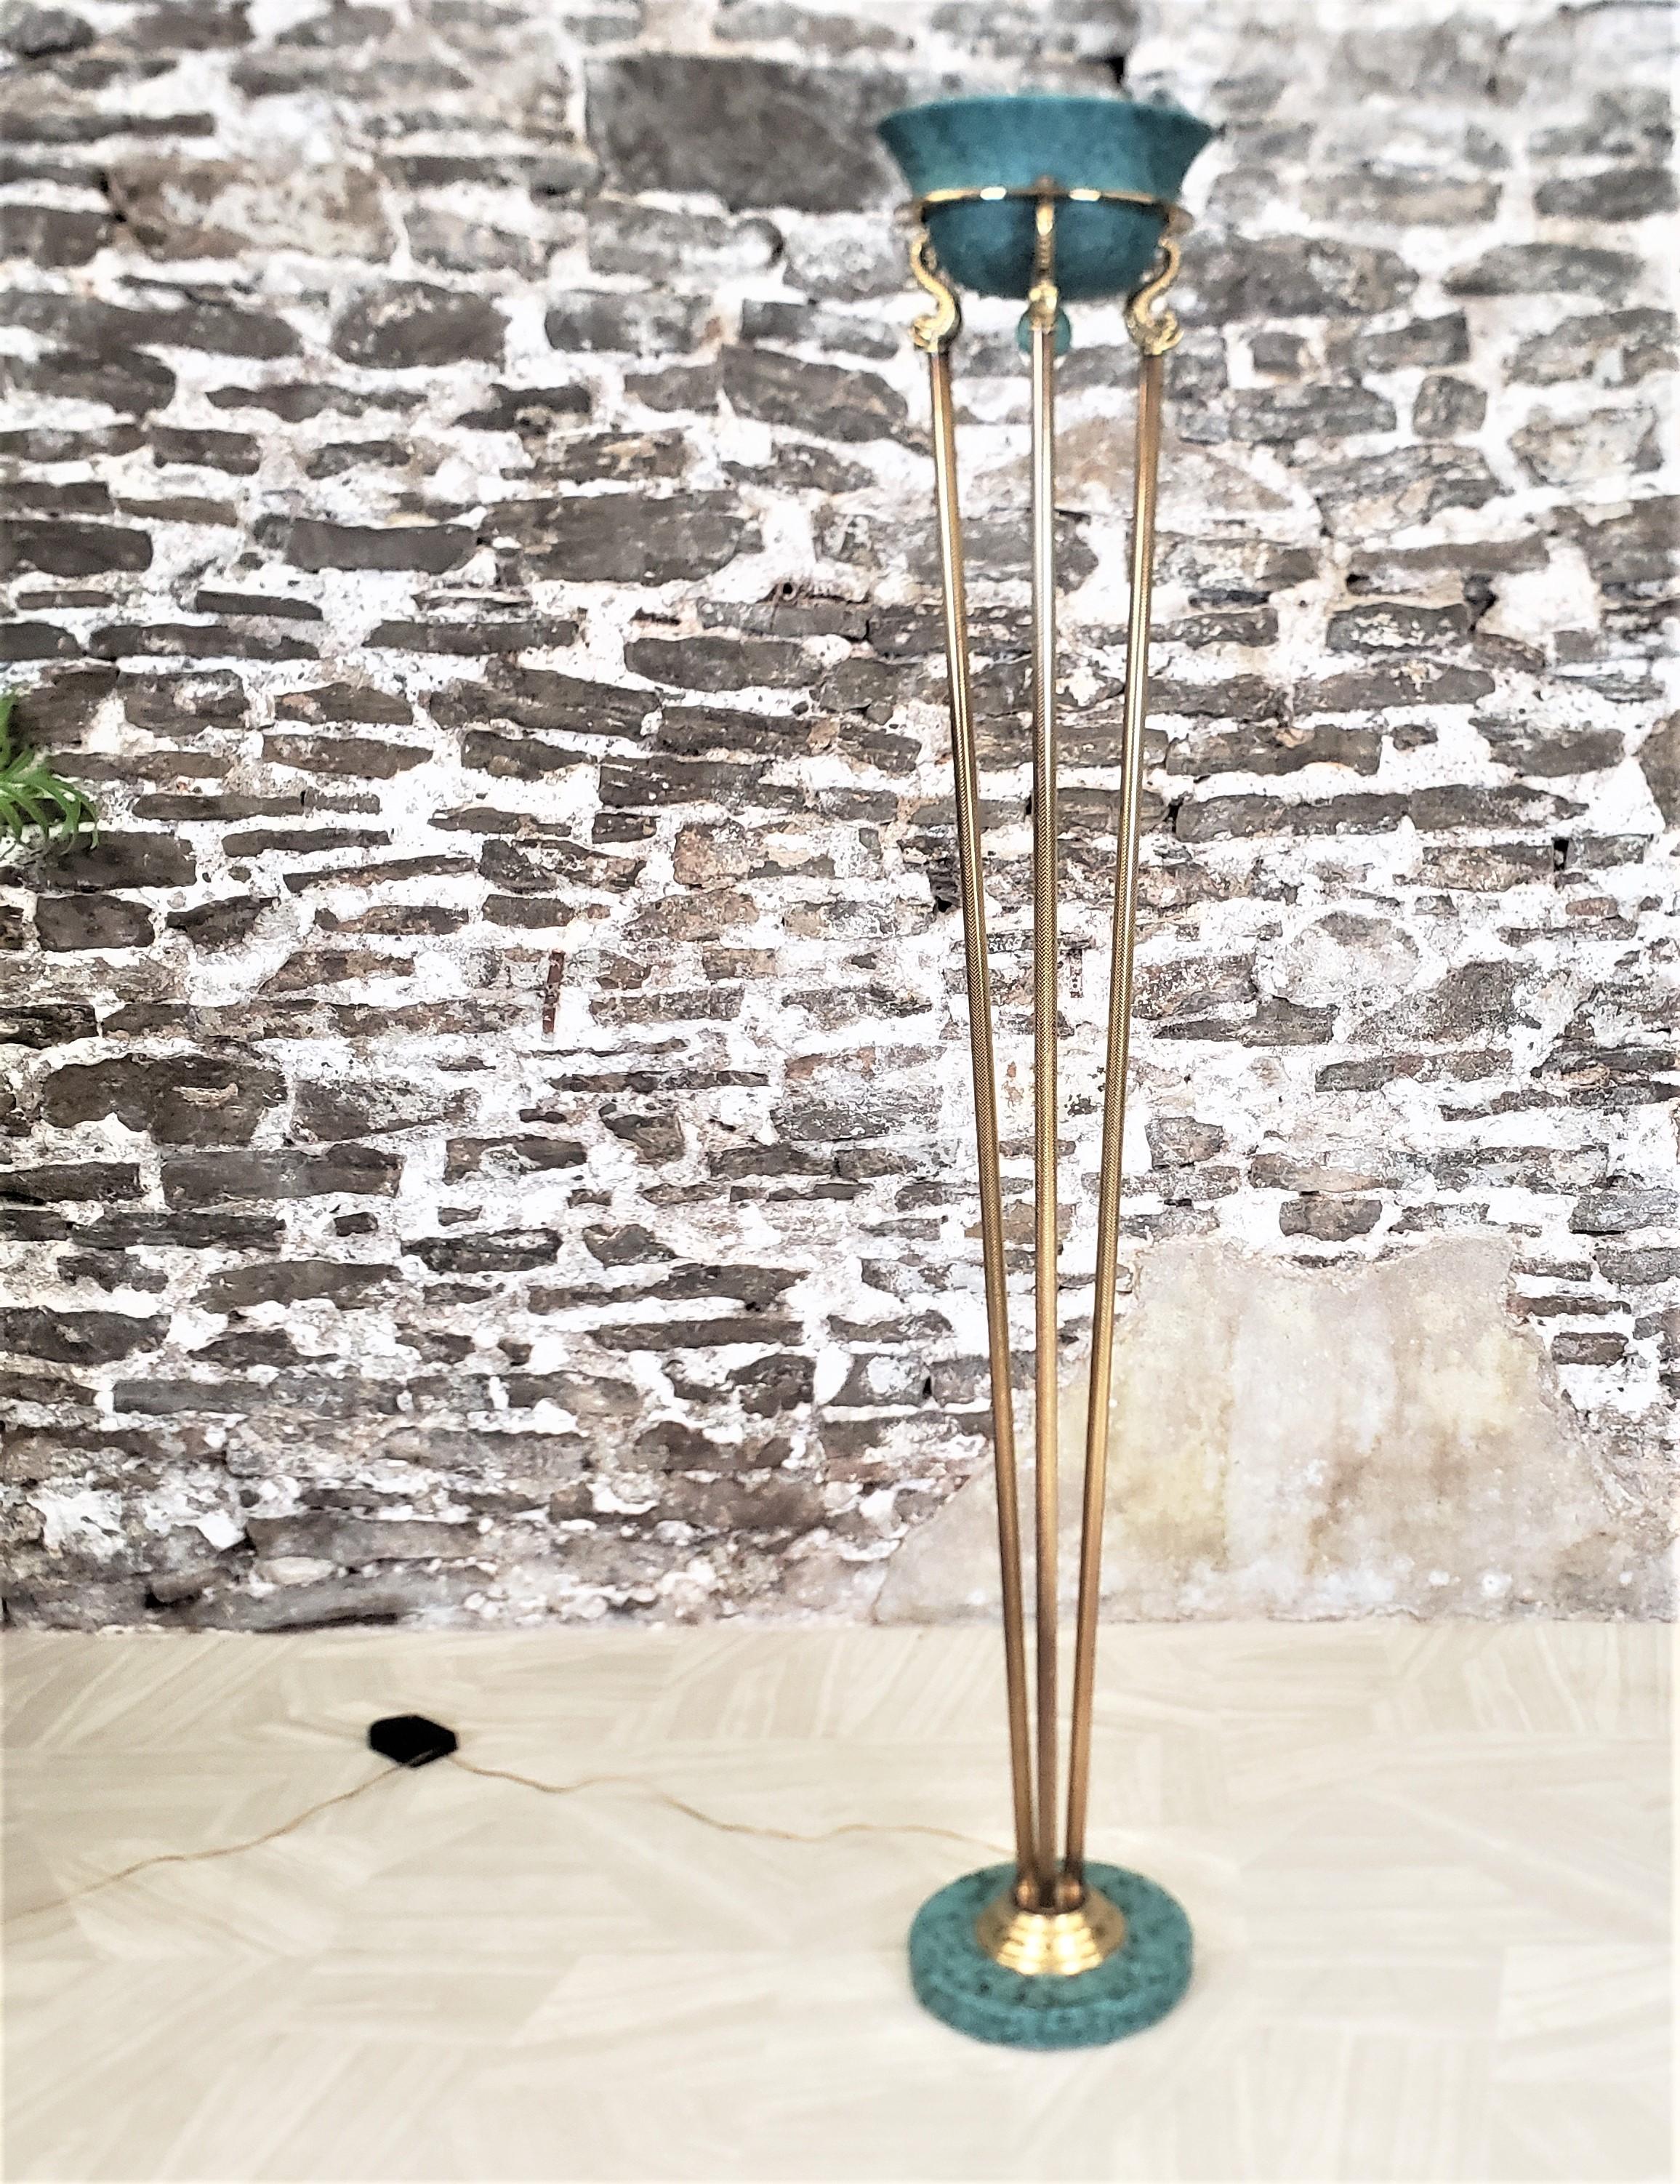 Hollywood Regency Vintage Relco Italian Halogen Tortiere Floor Lamp with Figural Brass Serpants For Sale